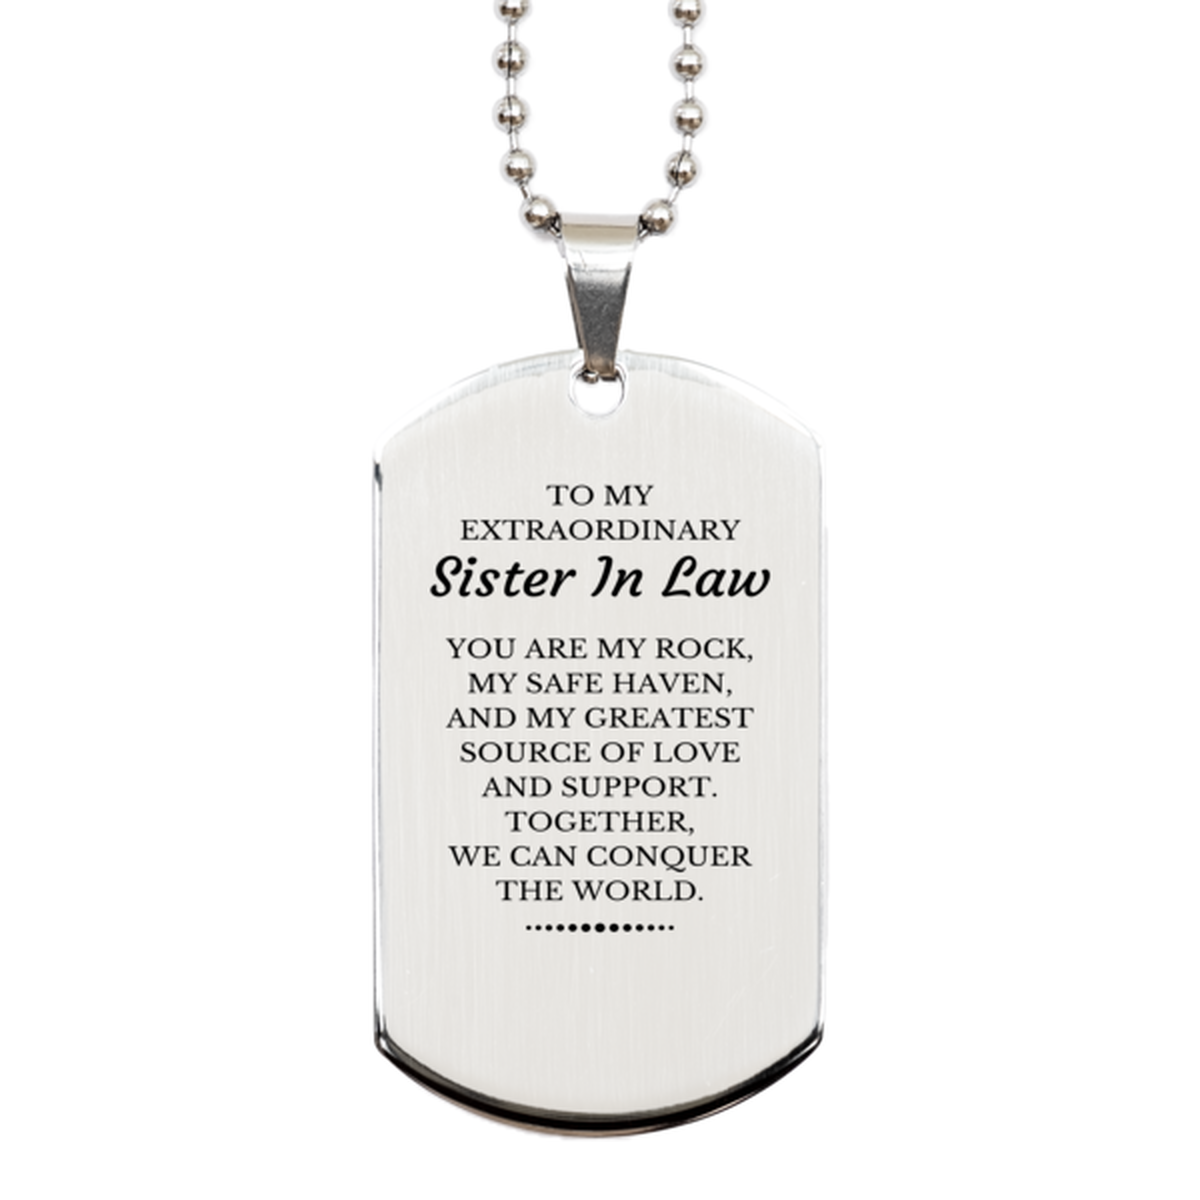 To My Extraordinary Sister In Law Gifts, Together, we can conquer the world, Birthday Silver Dog Tag For Sister In Law, Christmas Gifts For Sister In Law